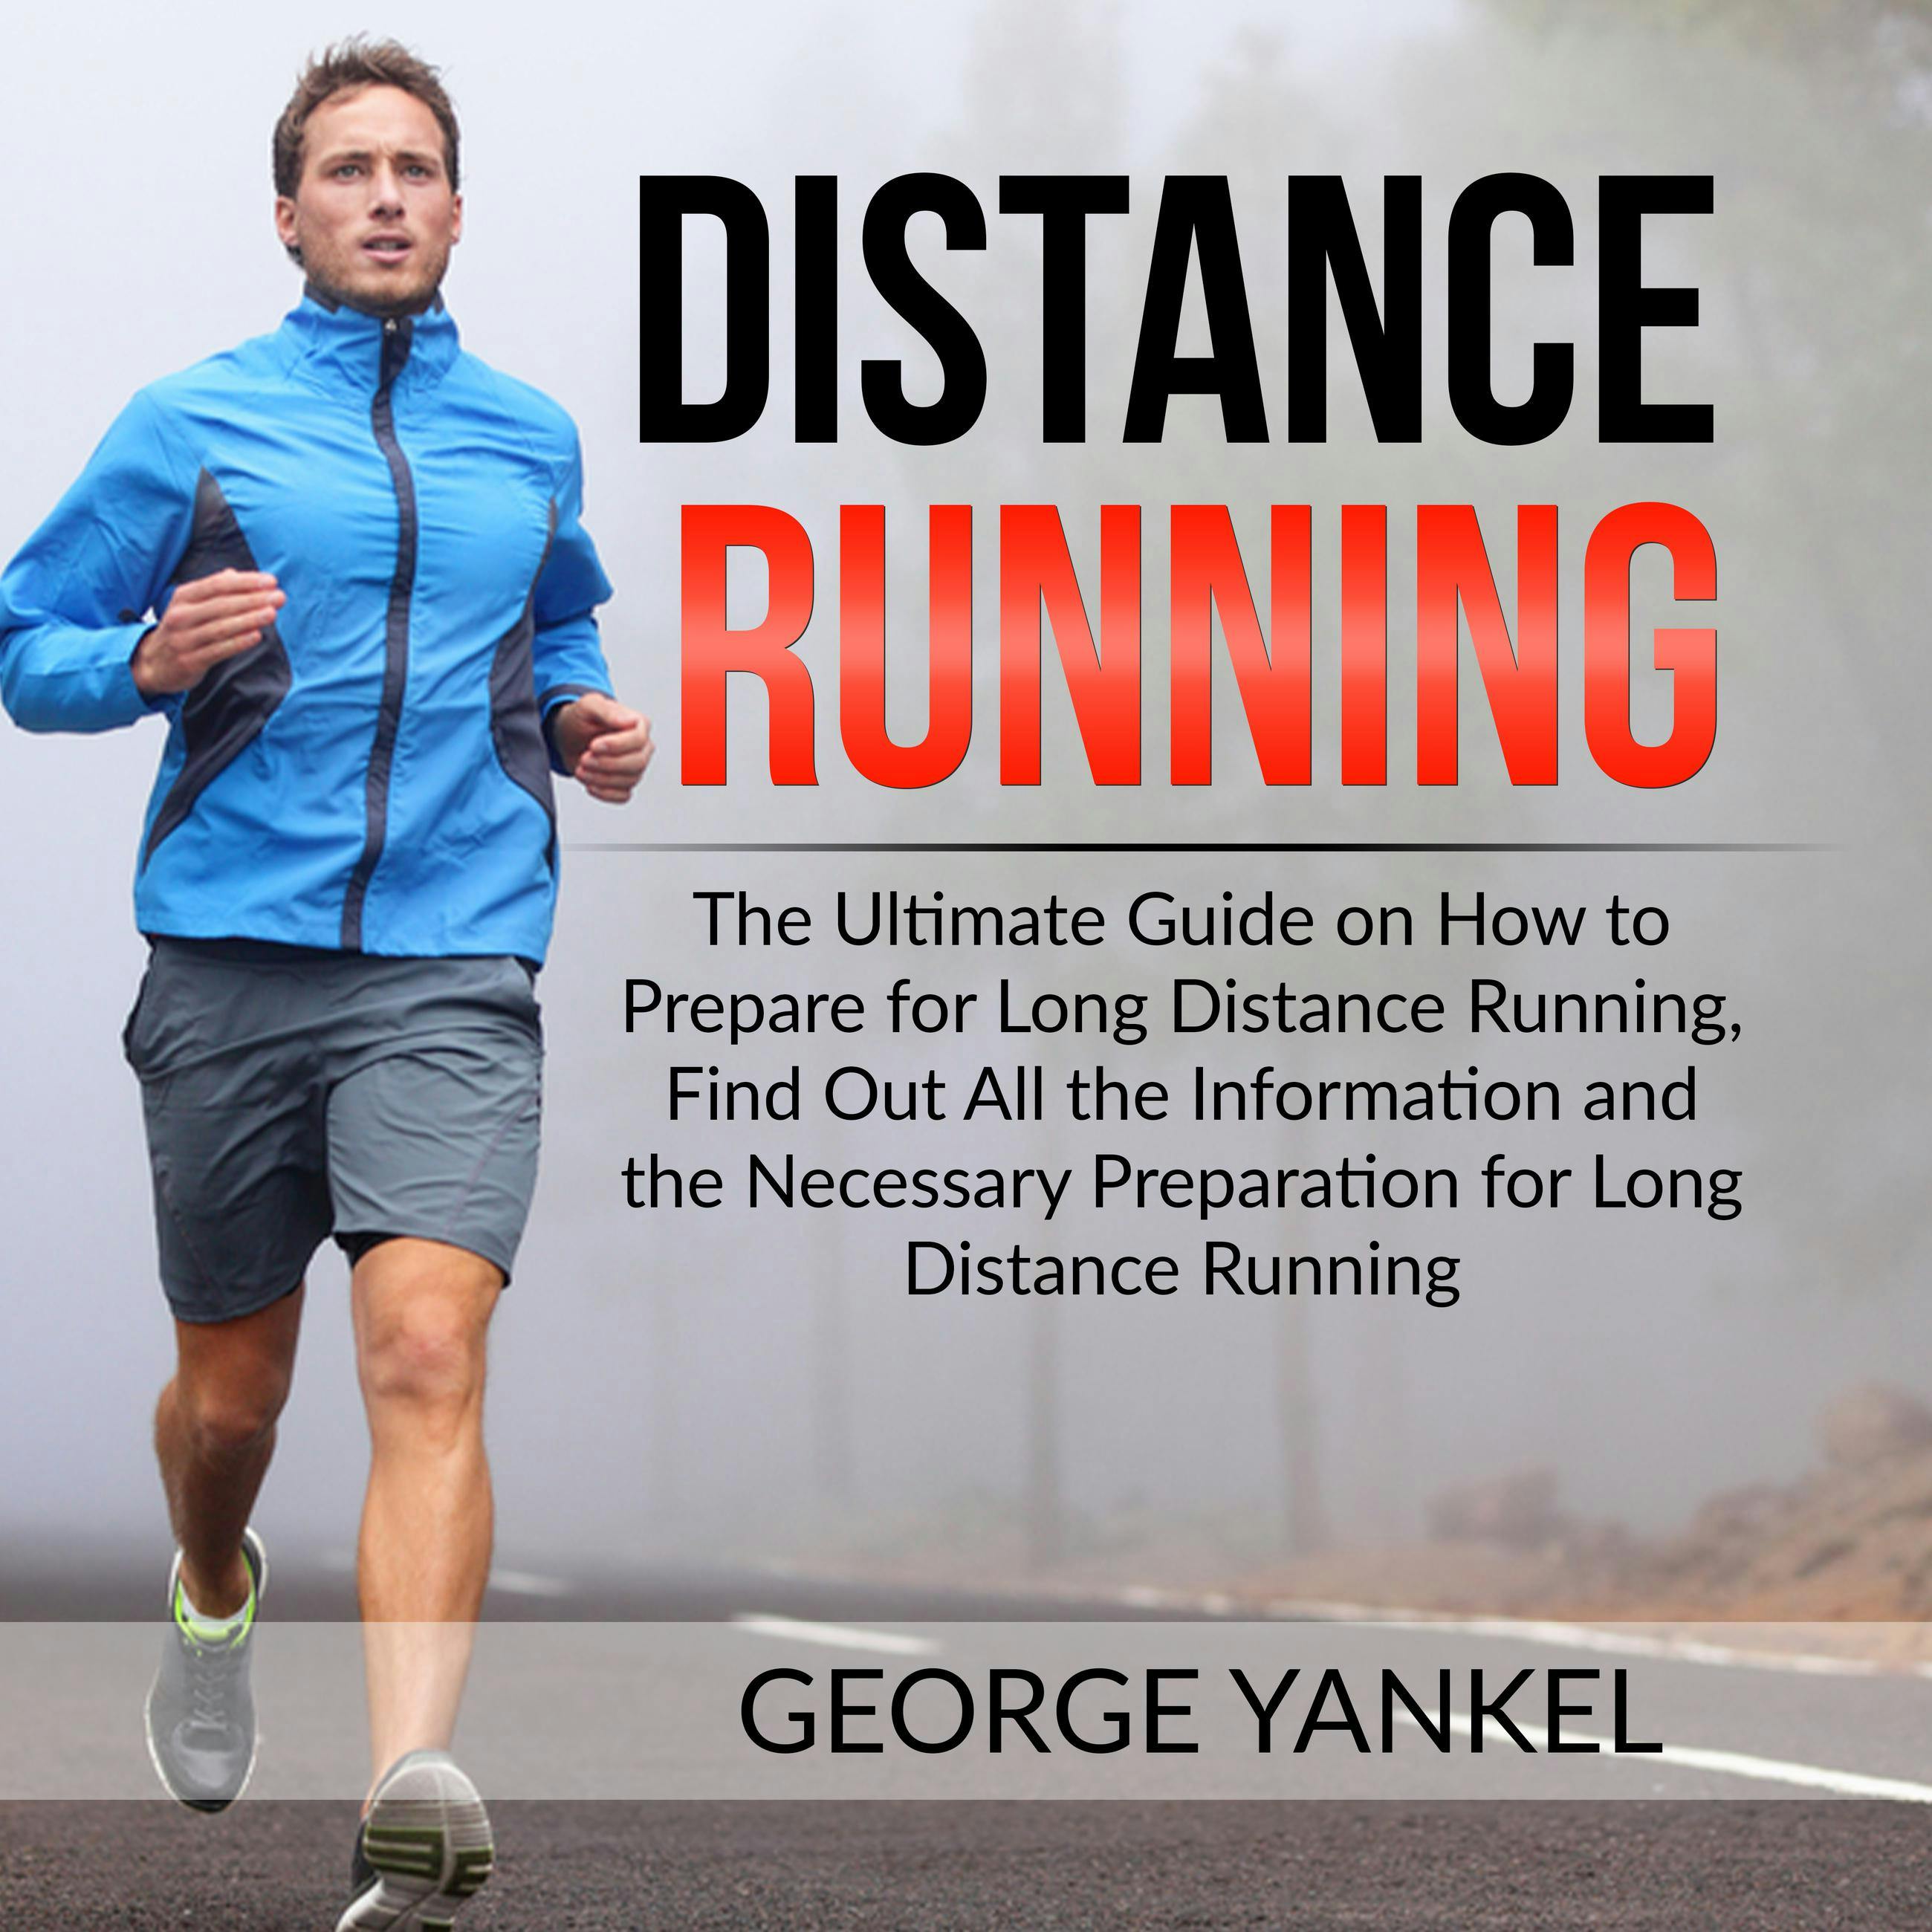 Distance Running: The Ultimate Guide on How to Prepare for Long Distance Running, Find Out All the Information and the Necessary Preparation for Long Distance Running - George Yankel